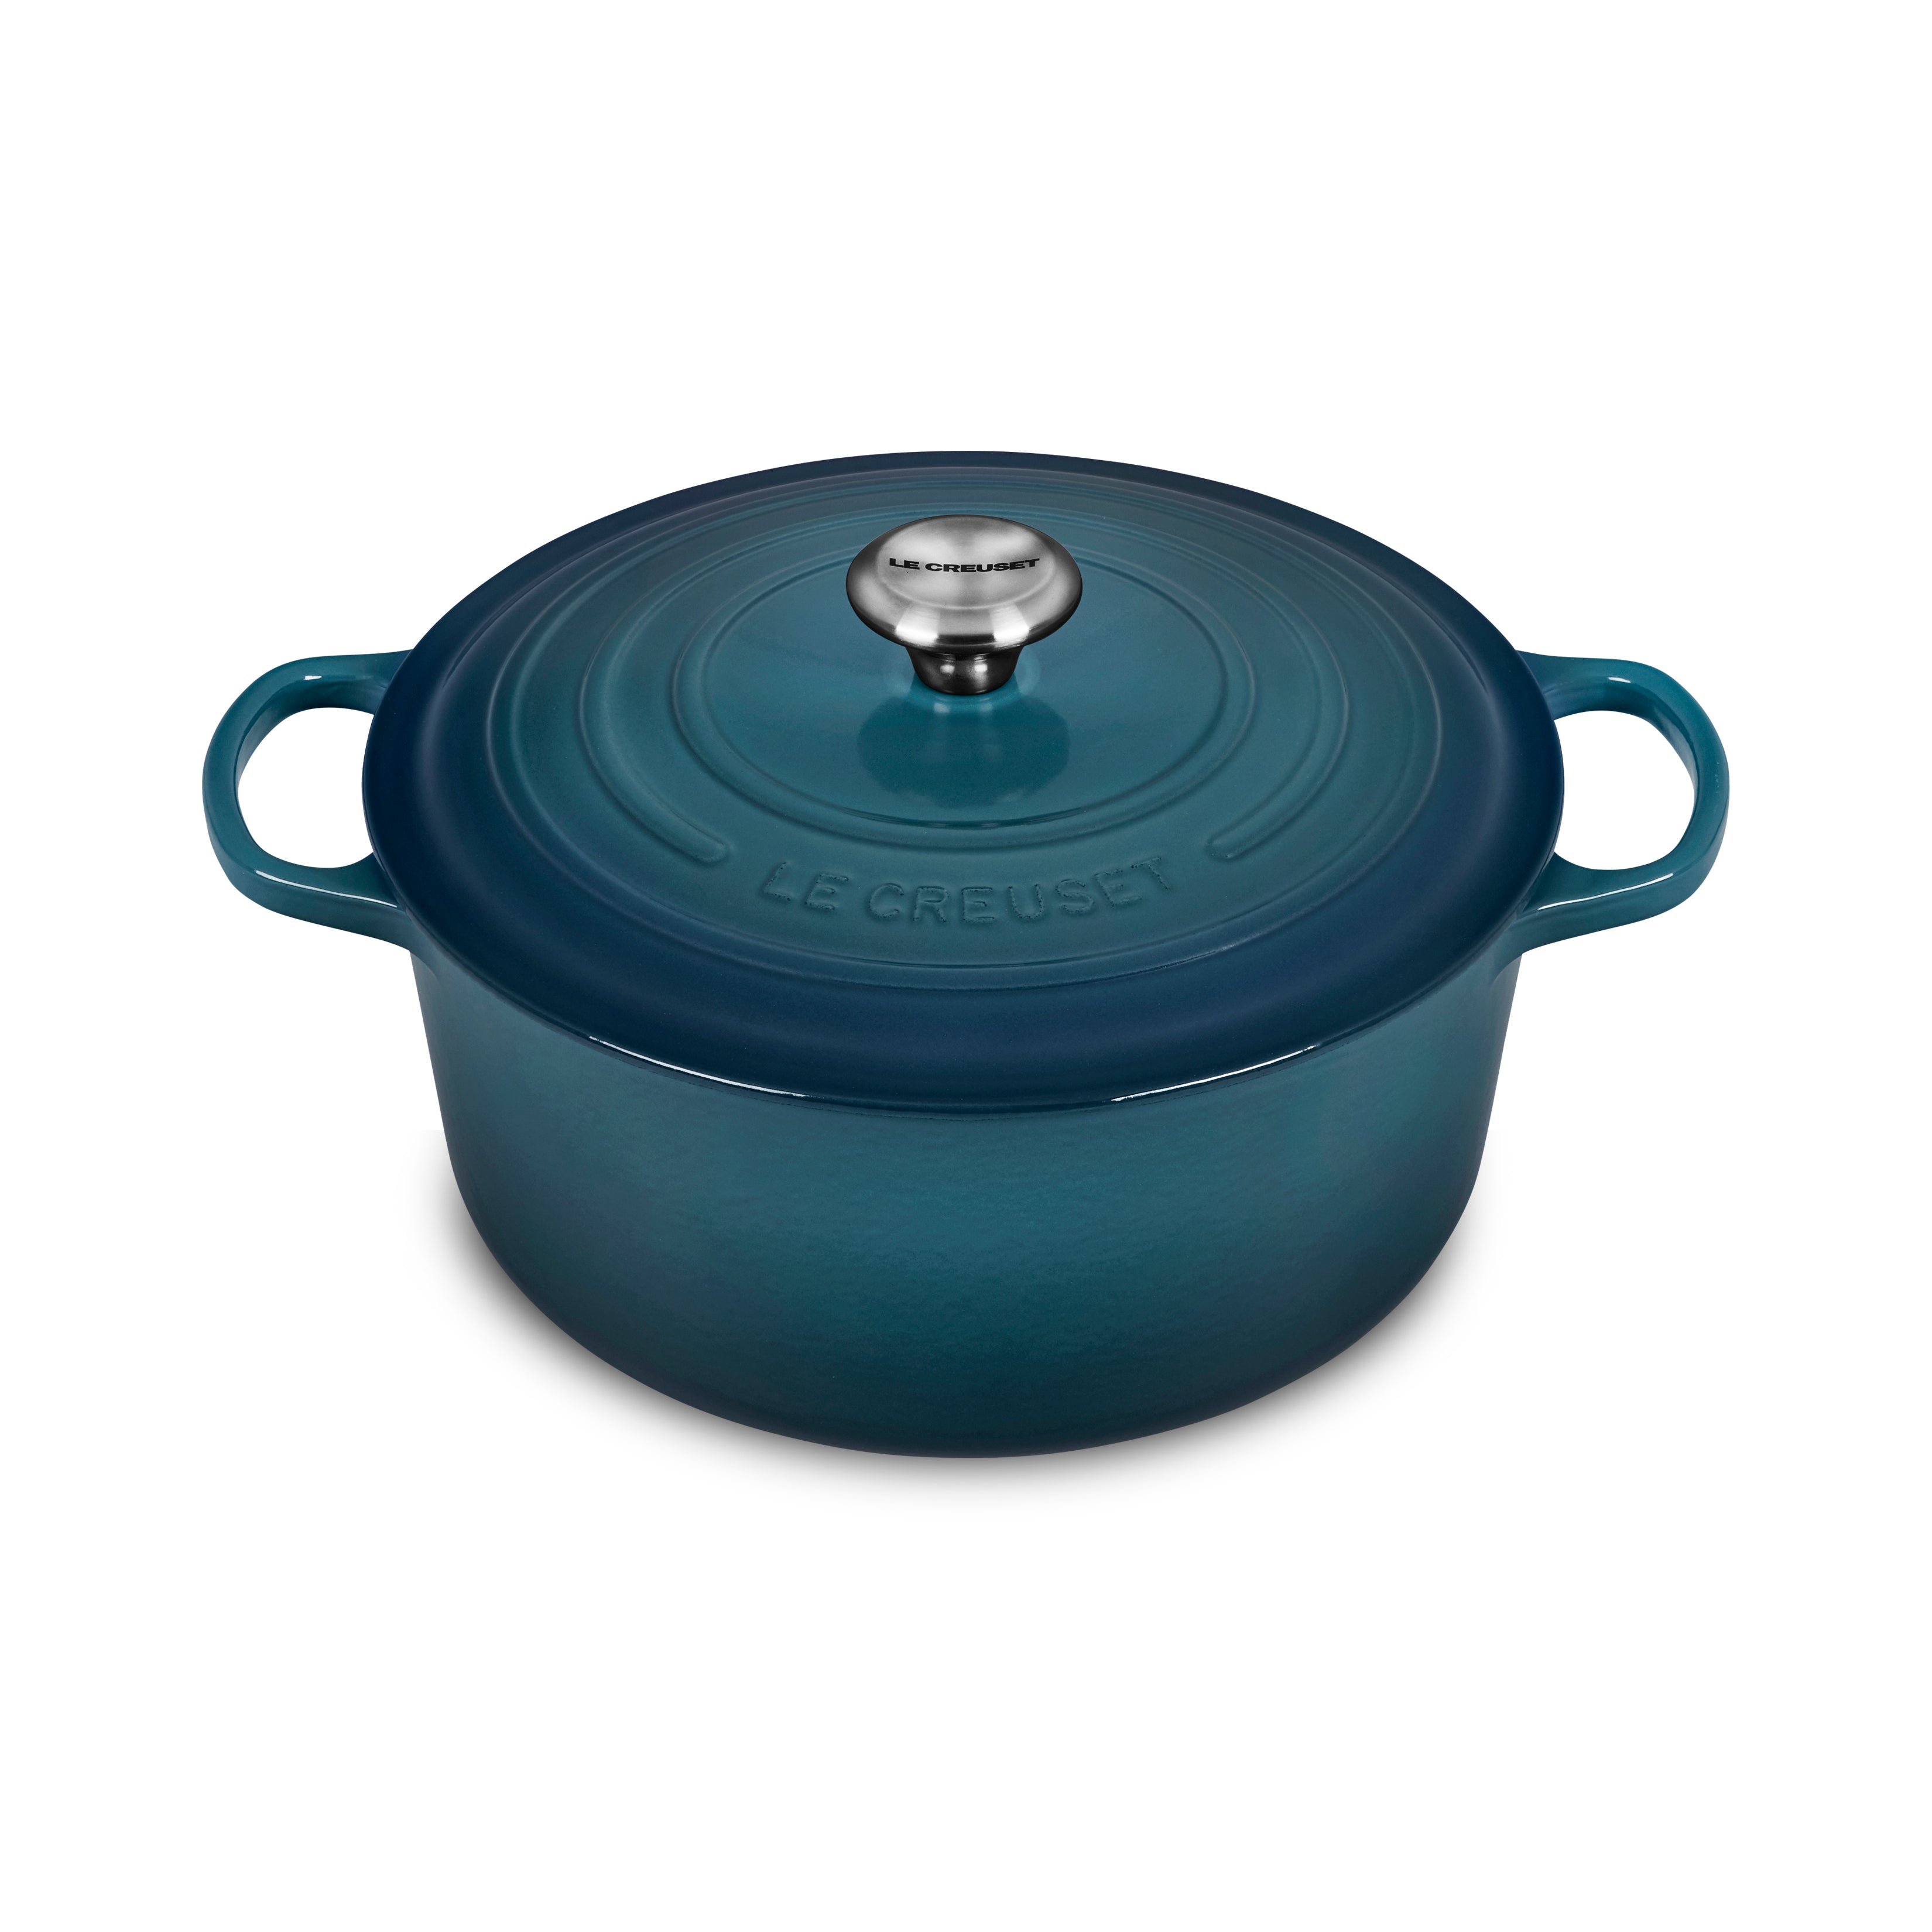 3.5-Quart Enameled Cast Iron Dutch Oven, Teal, Blue Sold by at Home